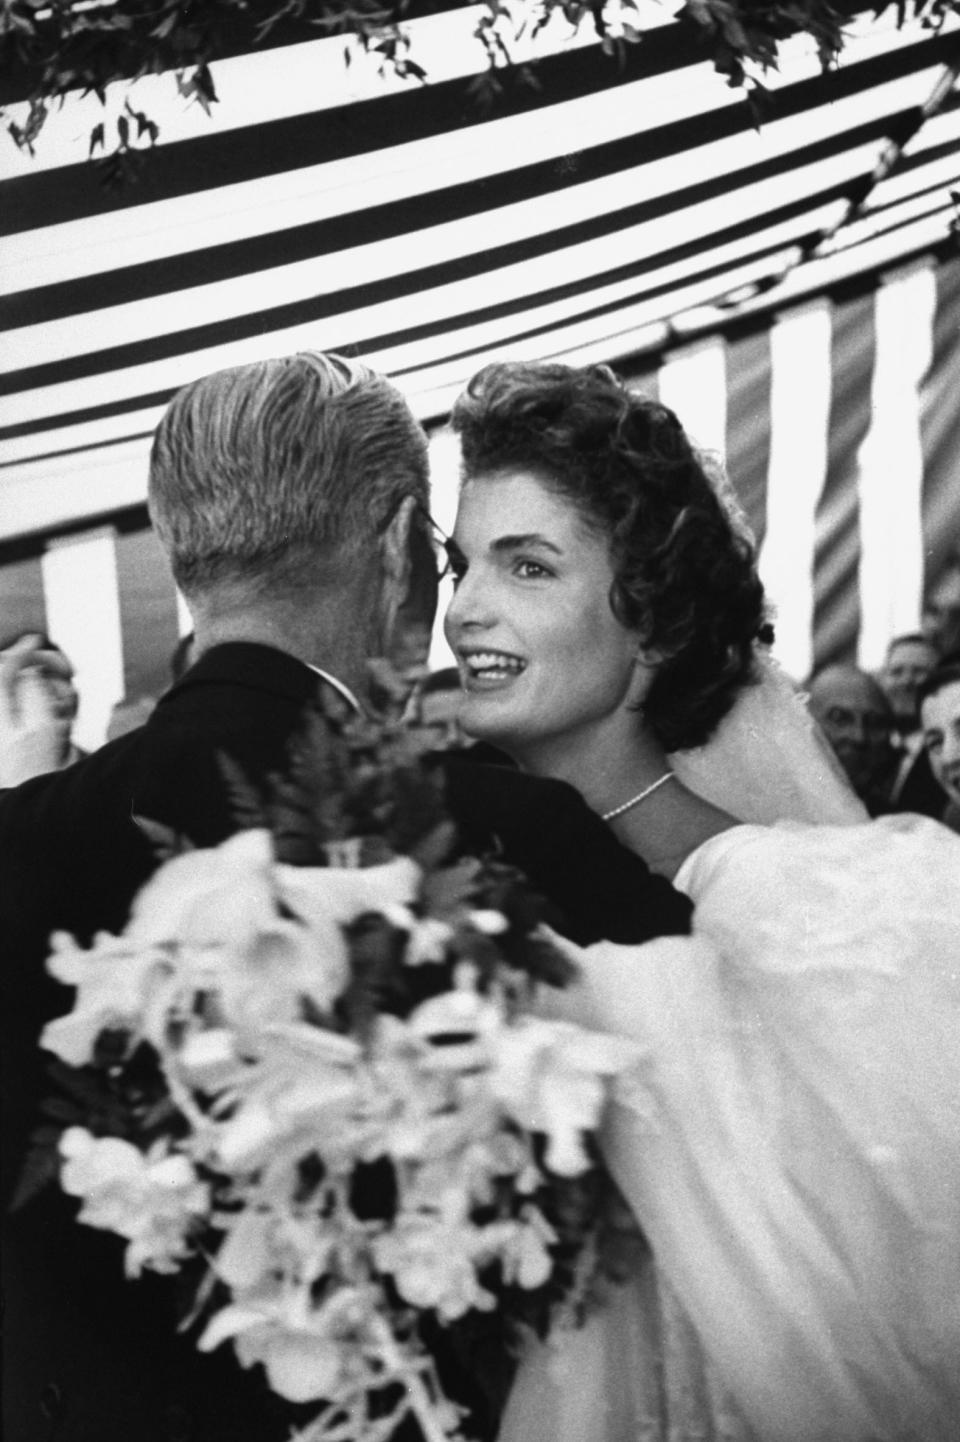 Former US Amb. to Great Britain Joseph Kennedy, dancing with son John F. Kennedy's bride, Jacqueline Bouvier Kennedy, at their wedding reception held at her mother's home. (Photo by Lisa Larsen//Time Life Pictures/Getty Images)